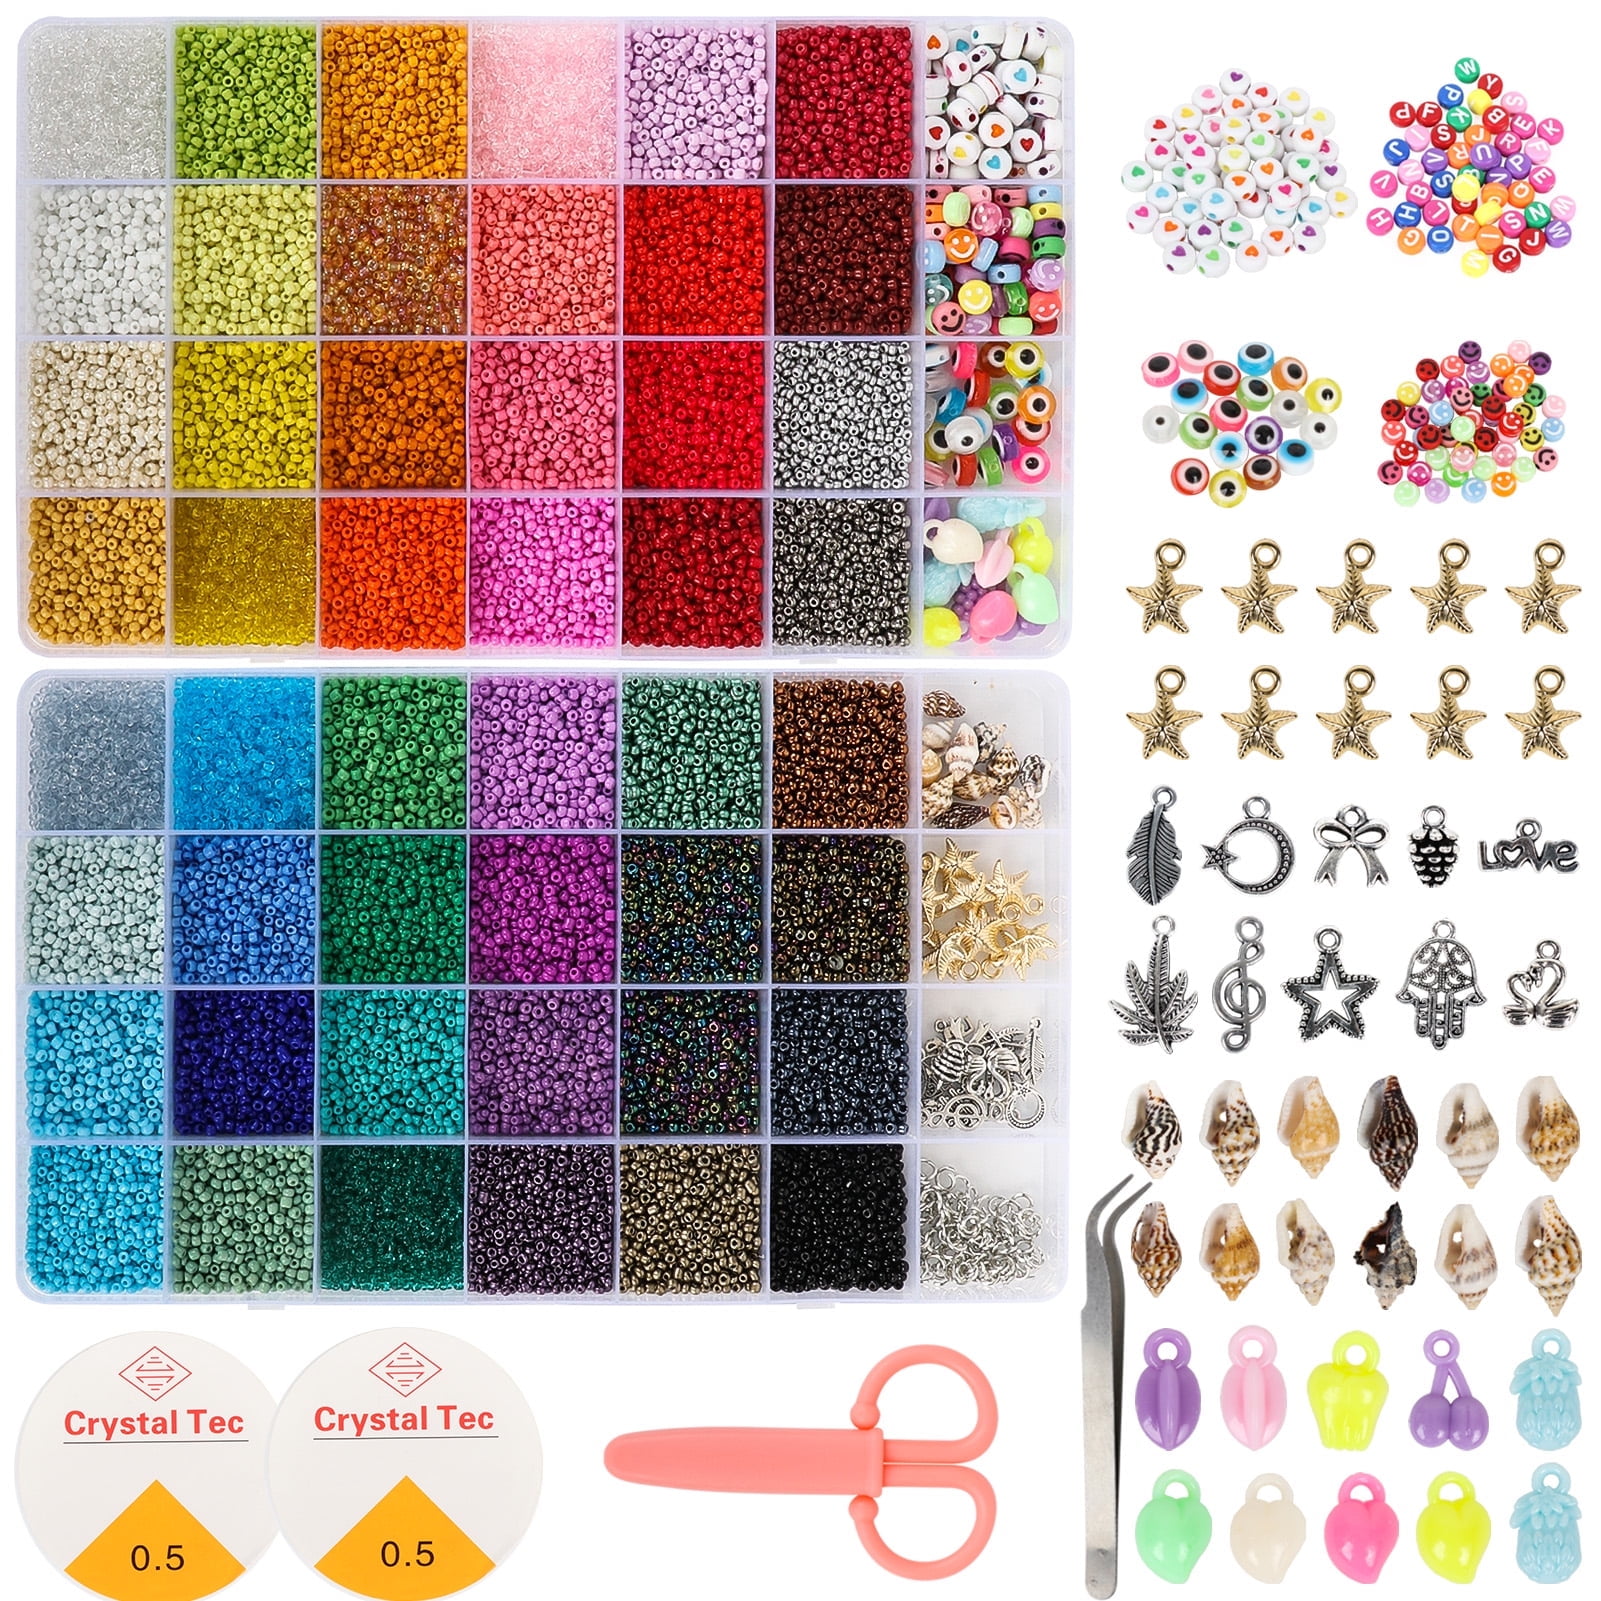 CandWuom 40000+ 2mm Glass Seed Beads for Bracelet Jewelry Making Kit